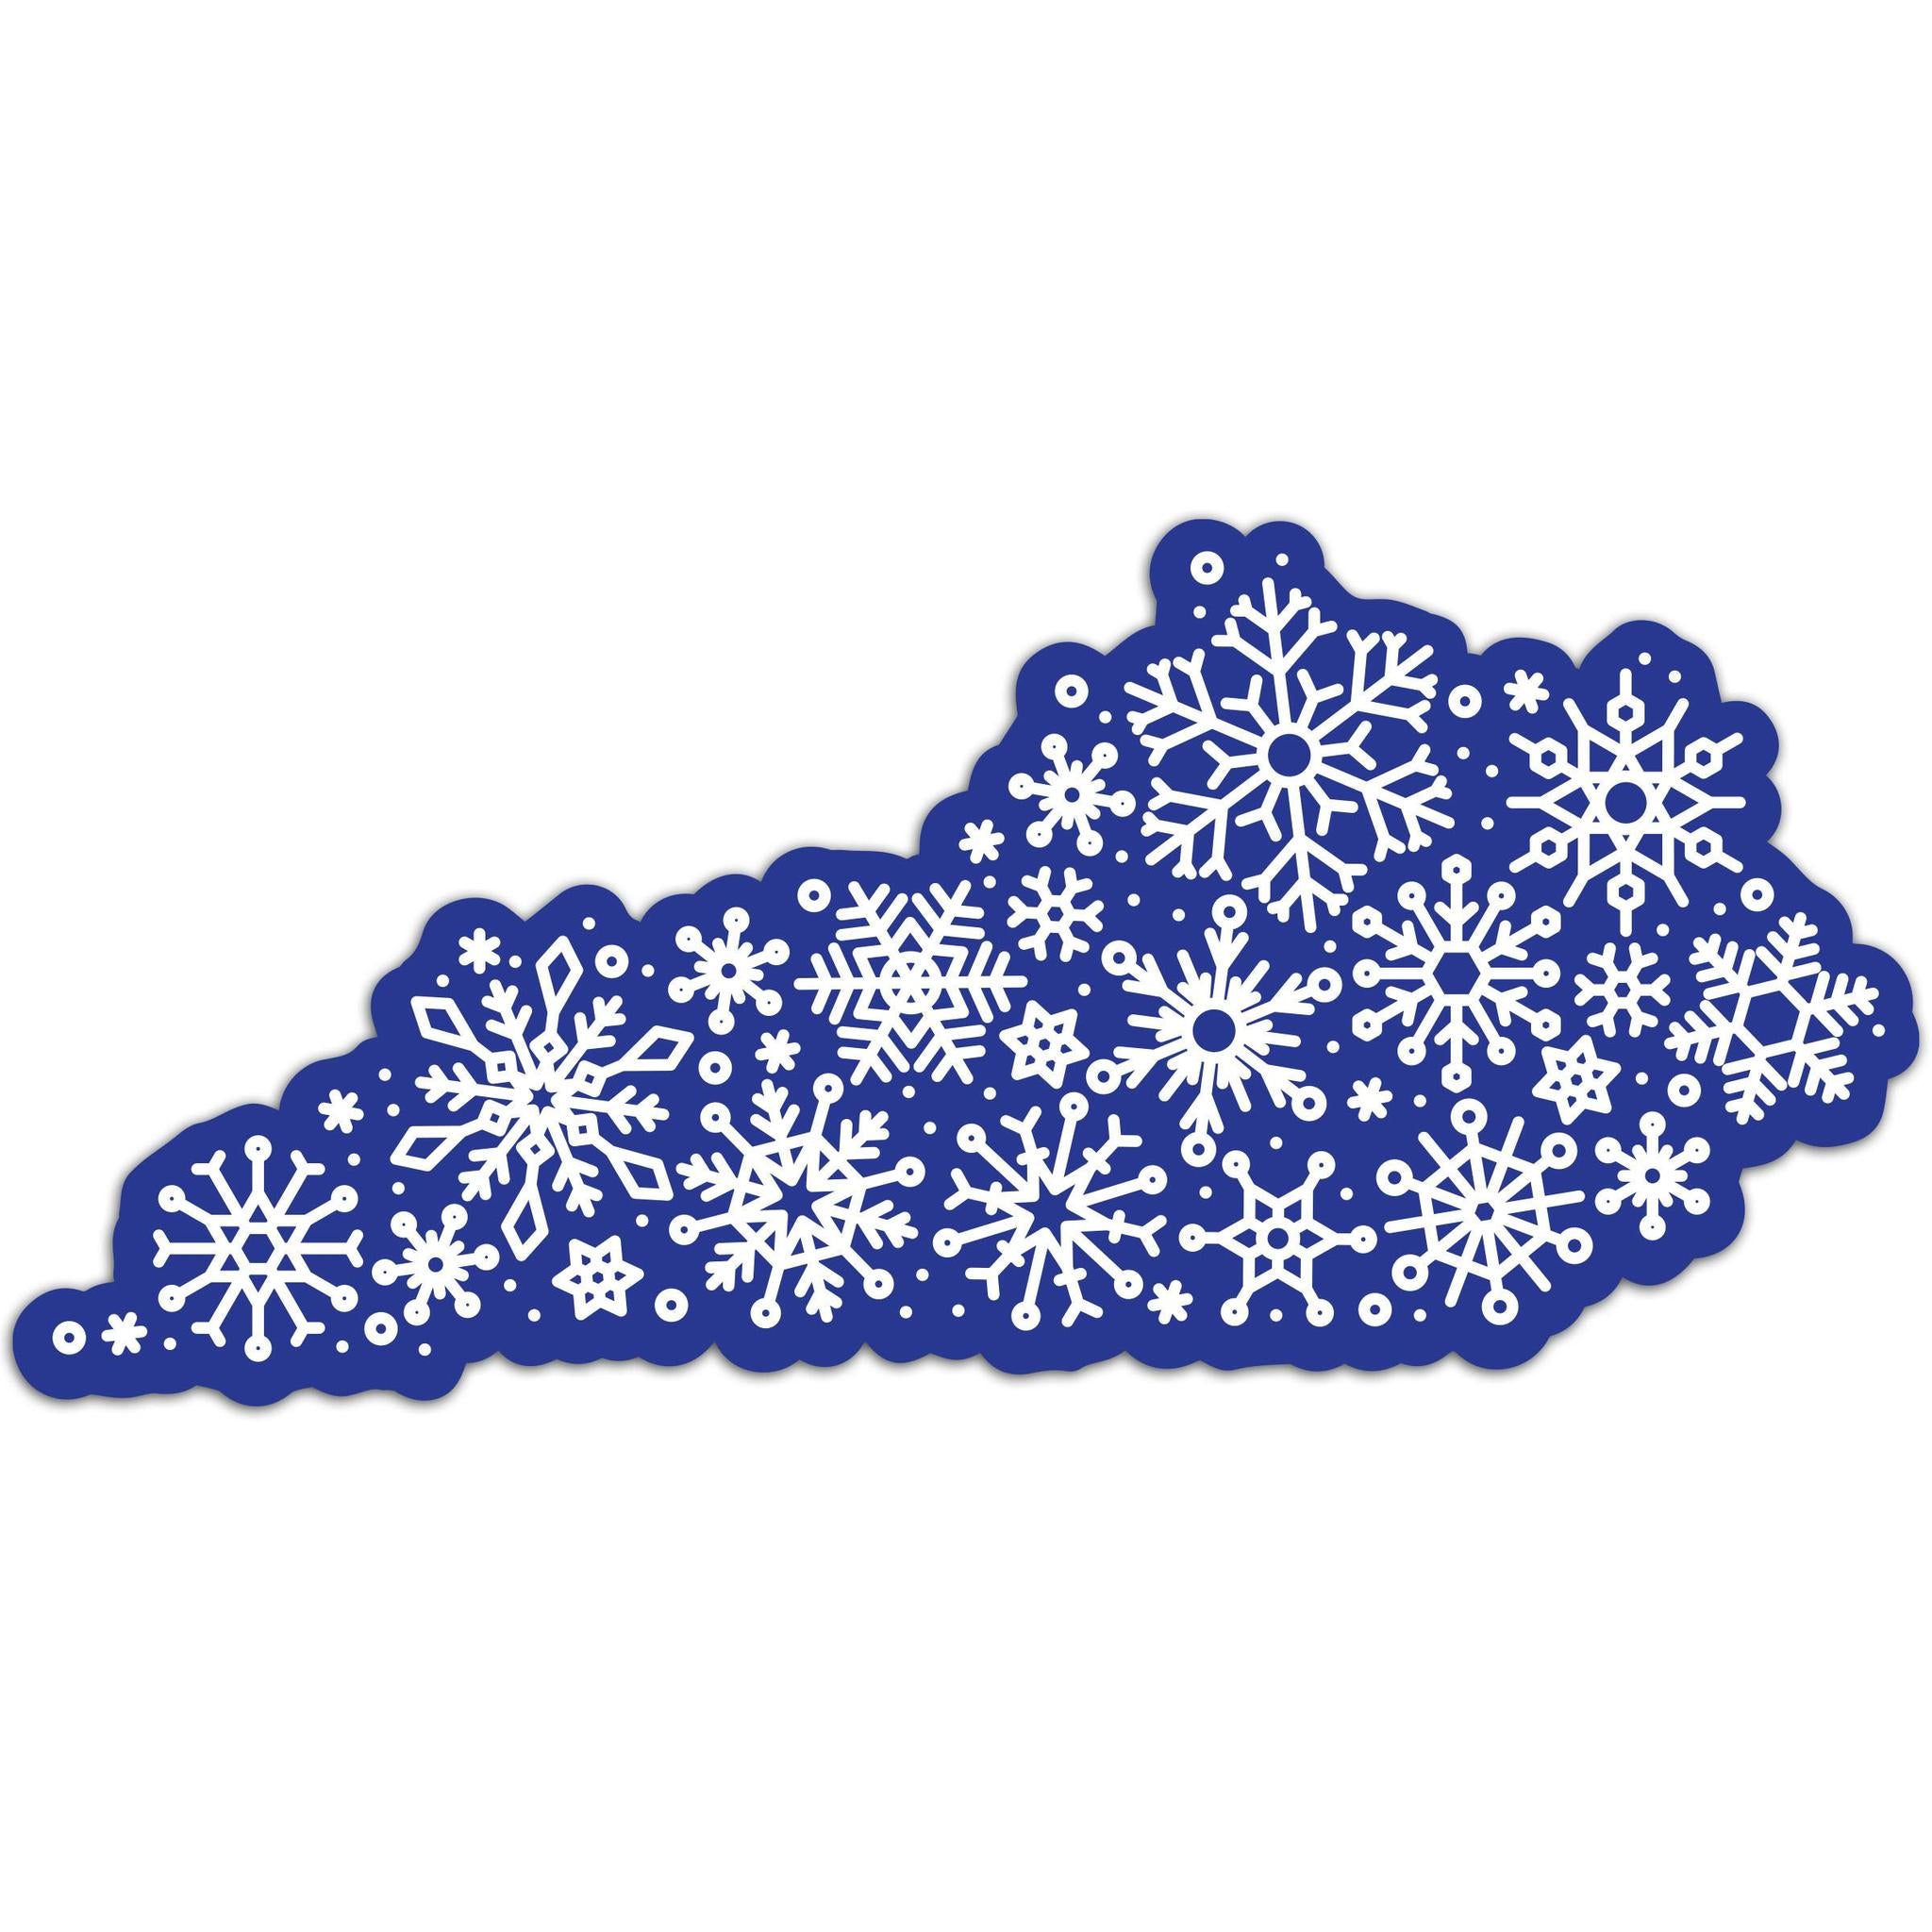 SnowflaKY Sticker-Stickers-KY for KY Store